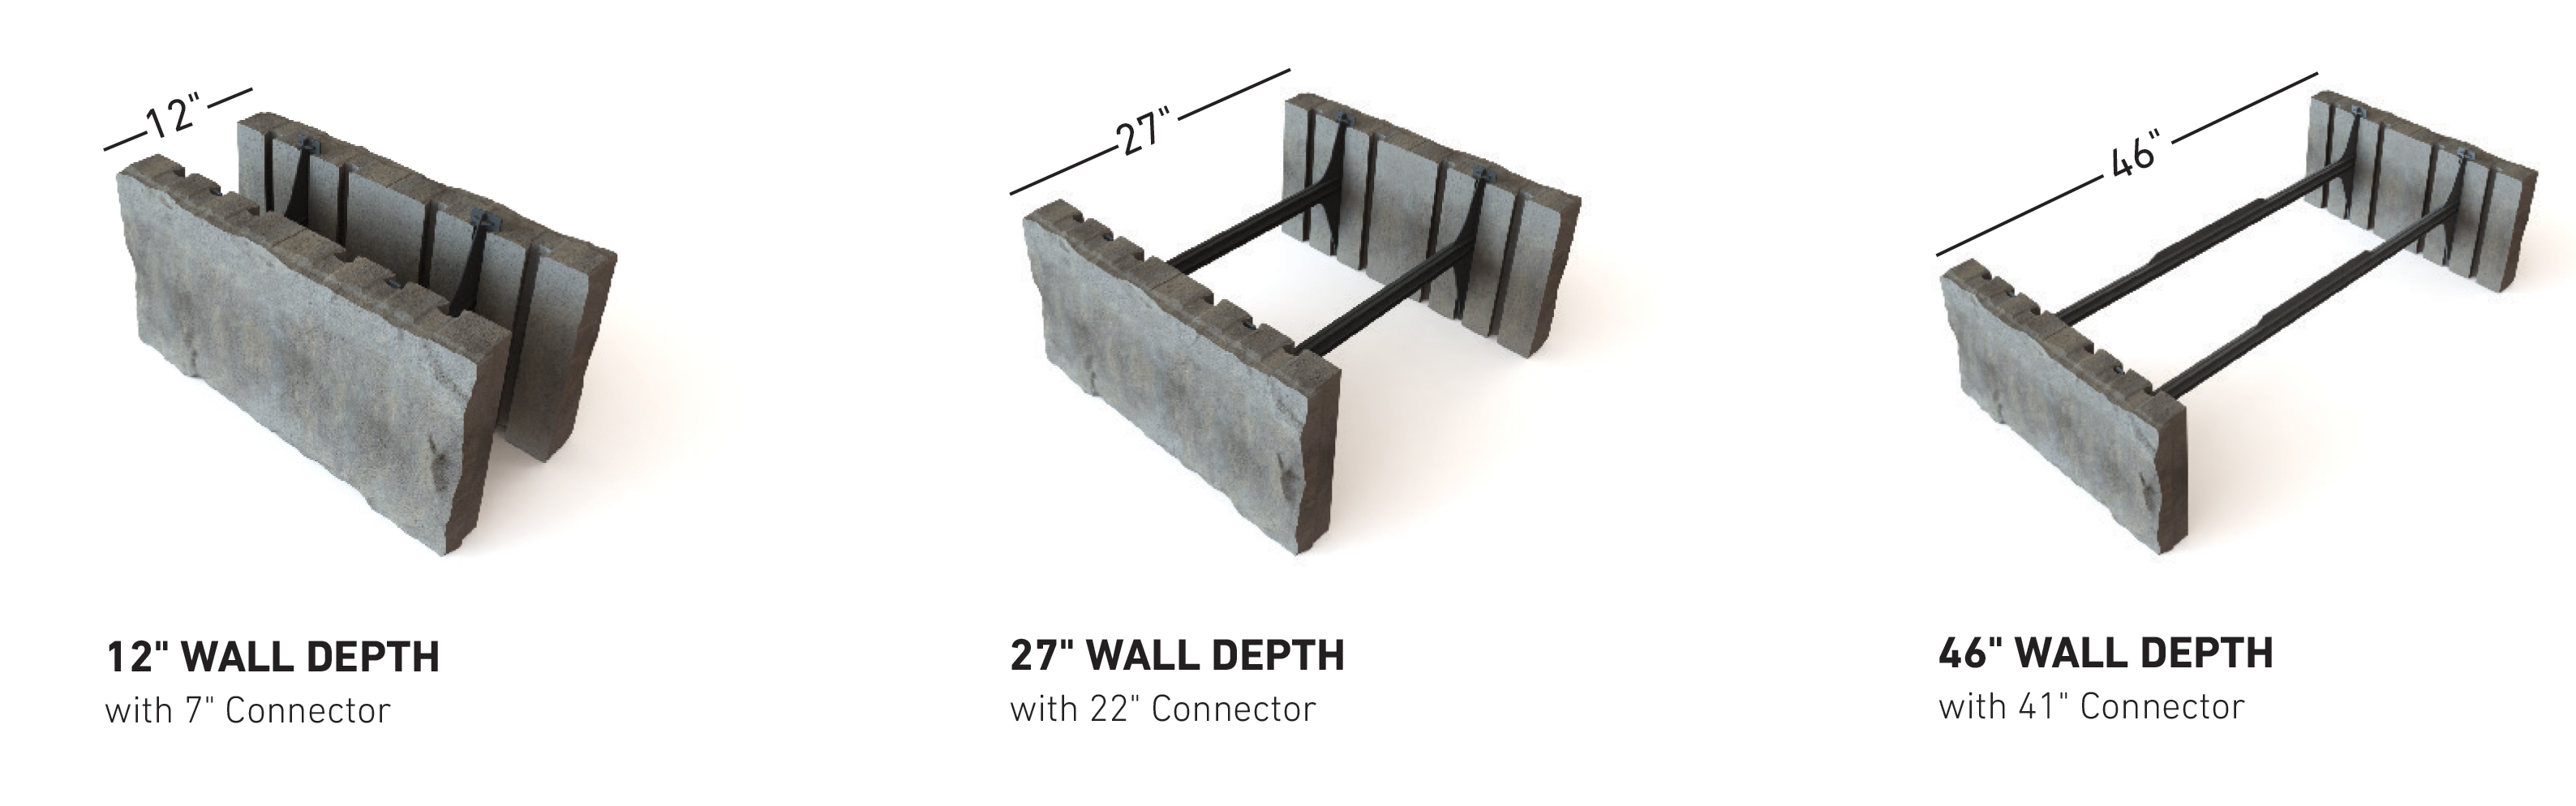 The Belgard® Mega-Tandem wall system has added a 7-inch connector, which provides a 12-inch wall depth option for more  design versatility.